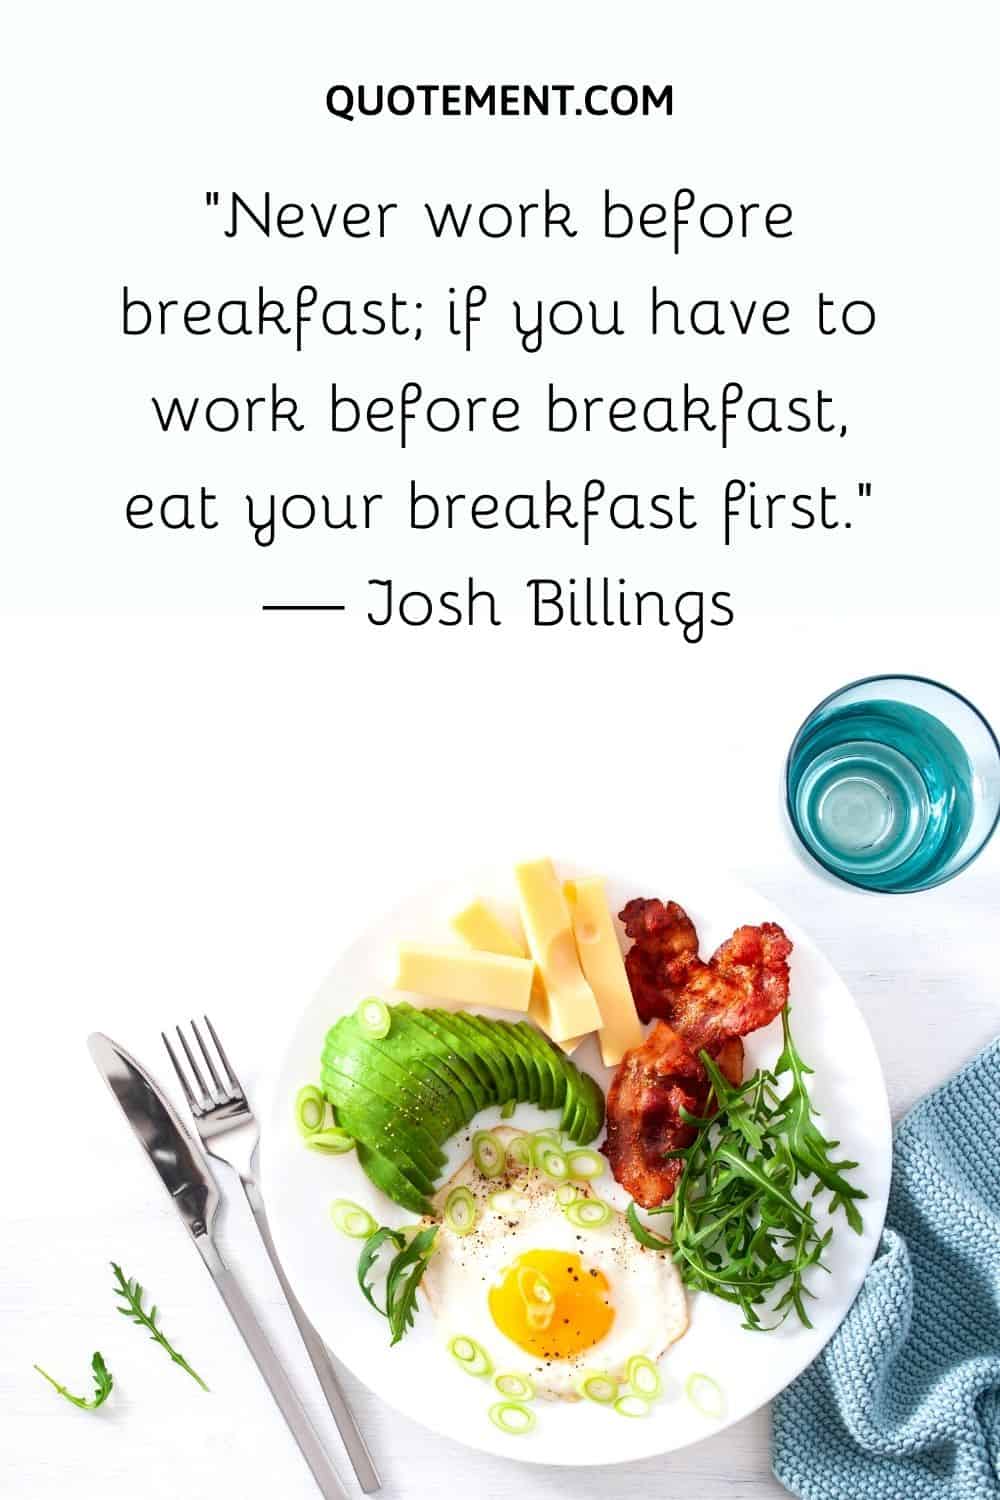 “Never work before breakfast; if you have to work before breakfast, eat your breakfast first.” — Josh Billings